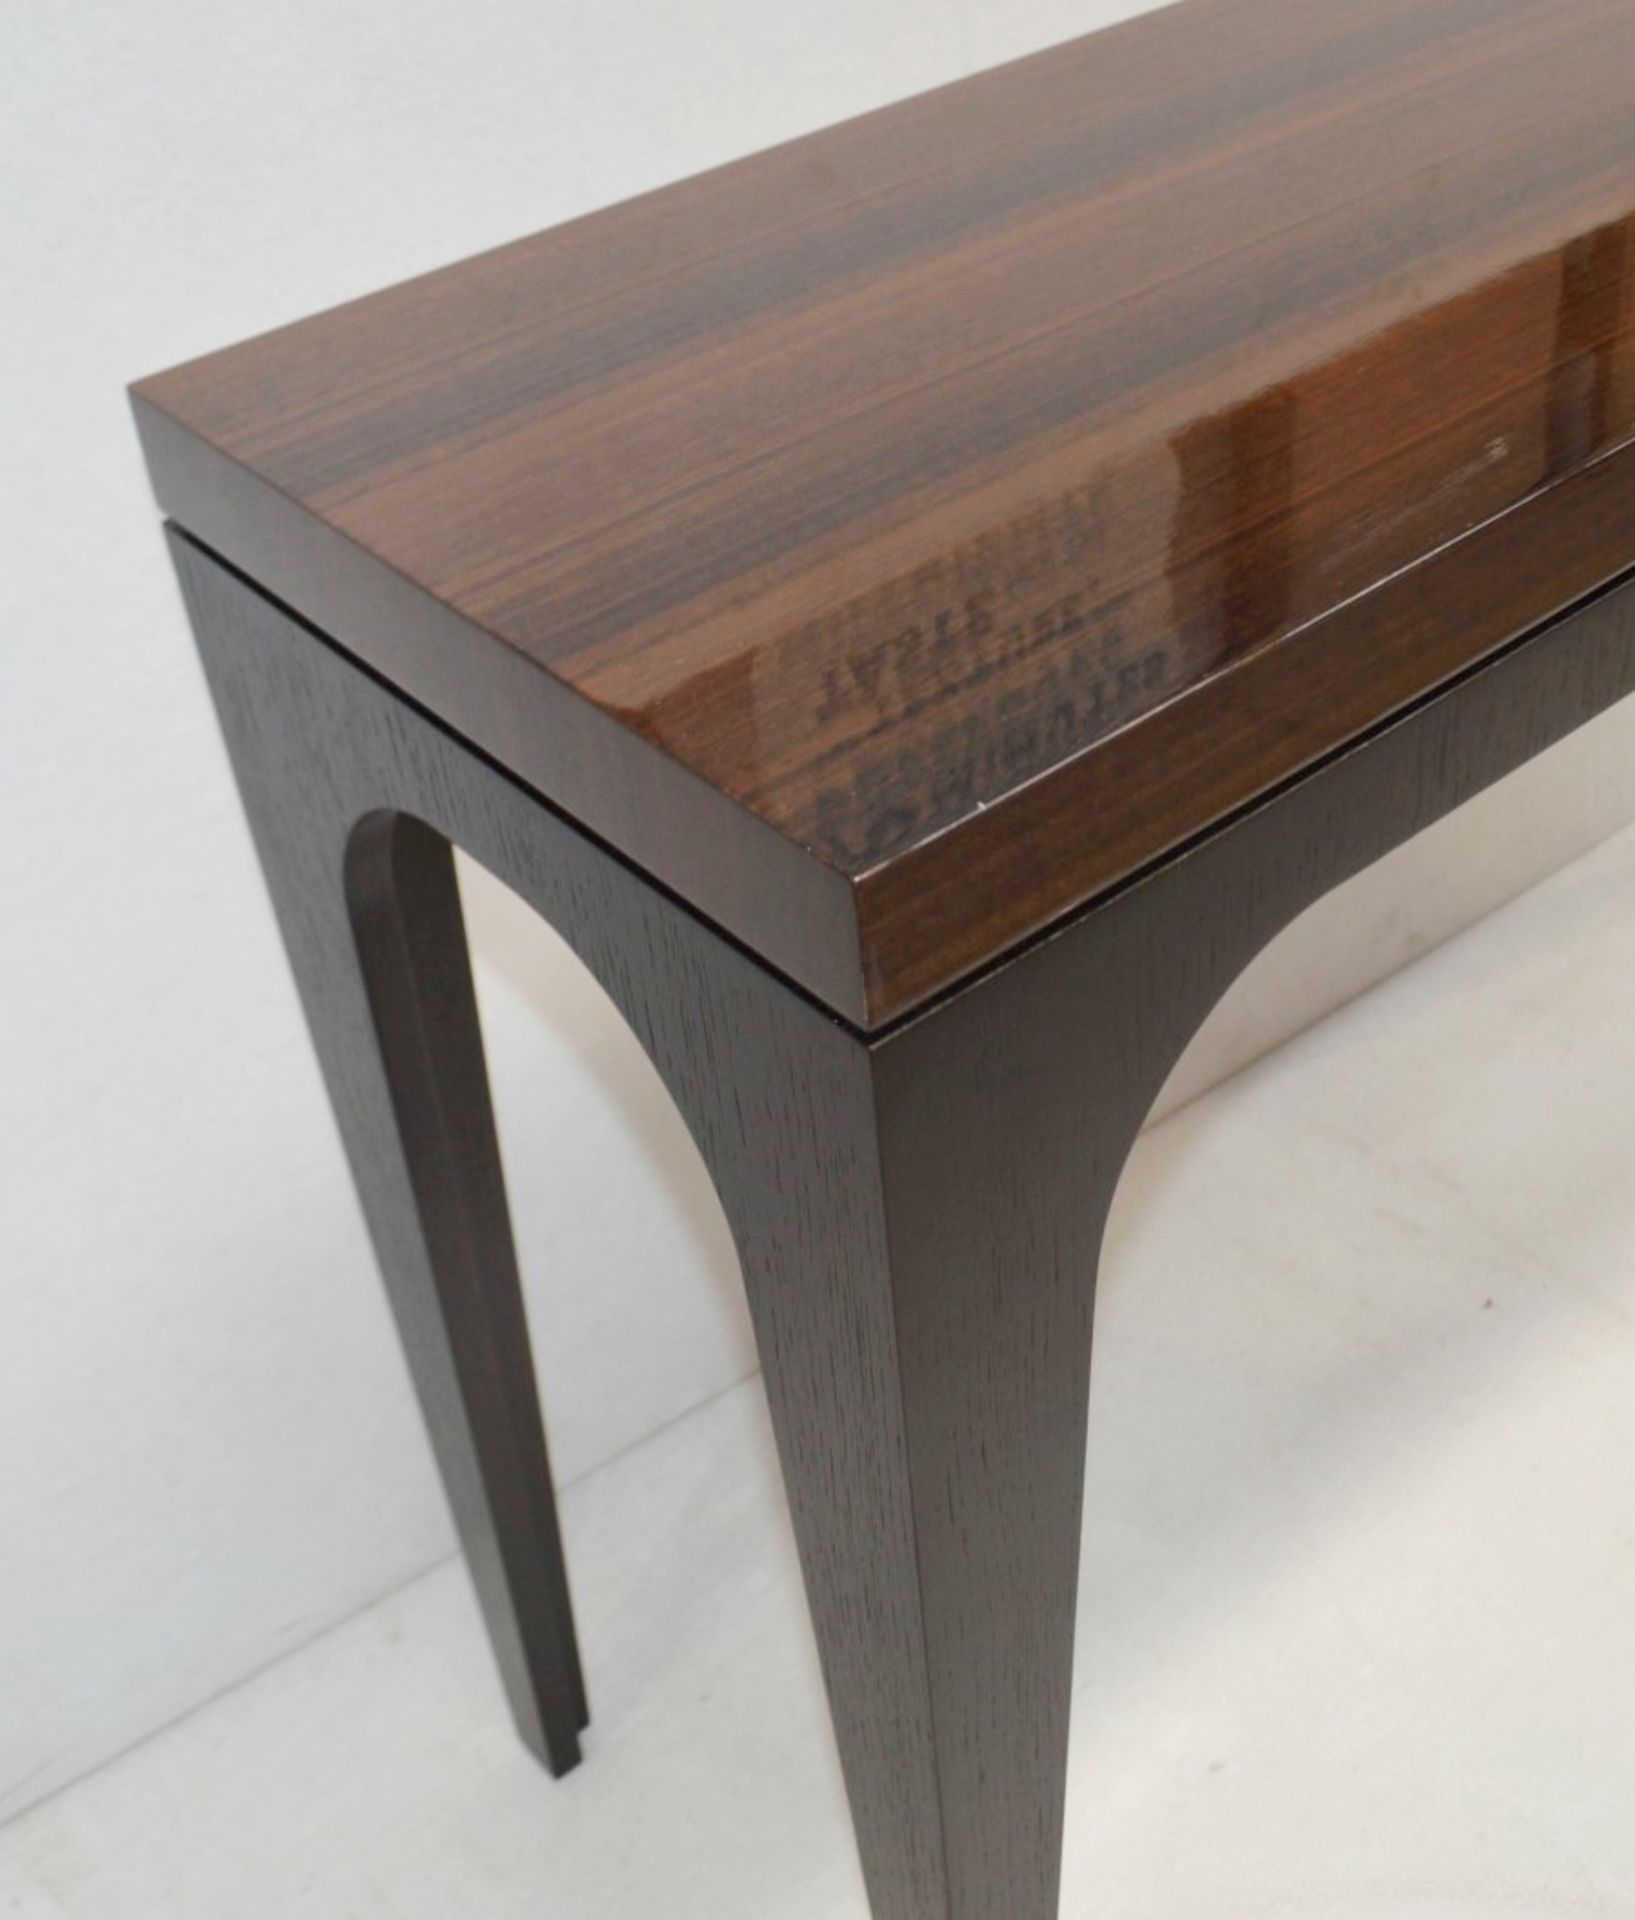 1 x FRATO 'NEW YORK' Luxury Console Table With A High Gloss Finish - Original RRP £1,173 - Image 2 of 6